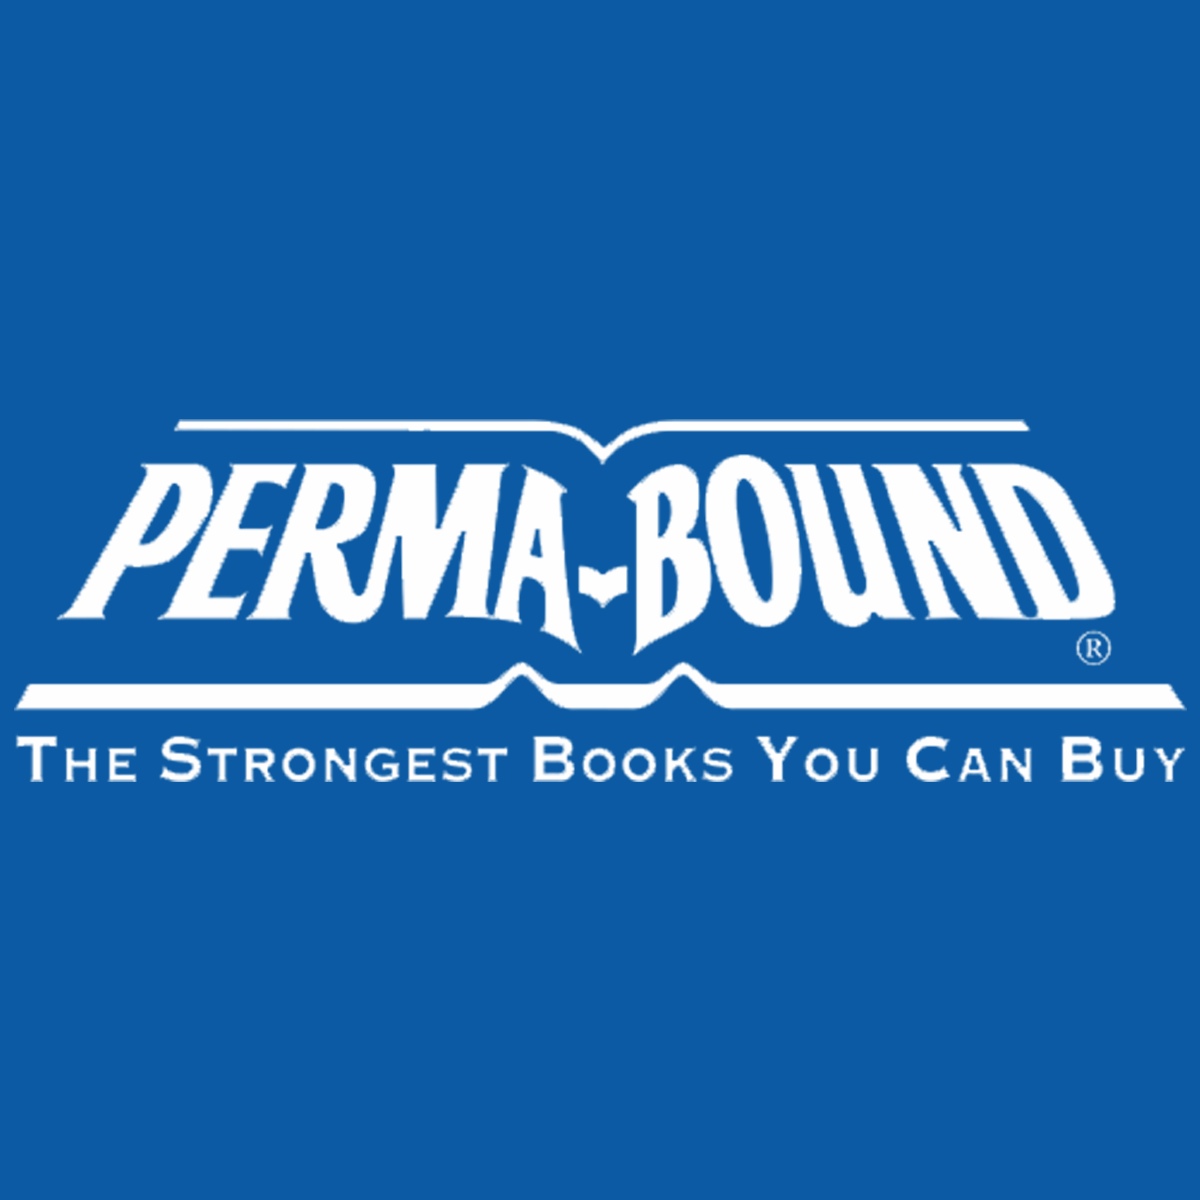 Perma-Bound Books - Brown Brothers Books